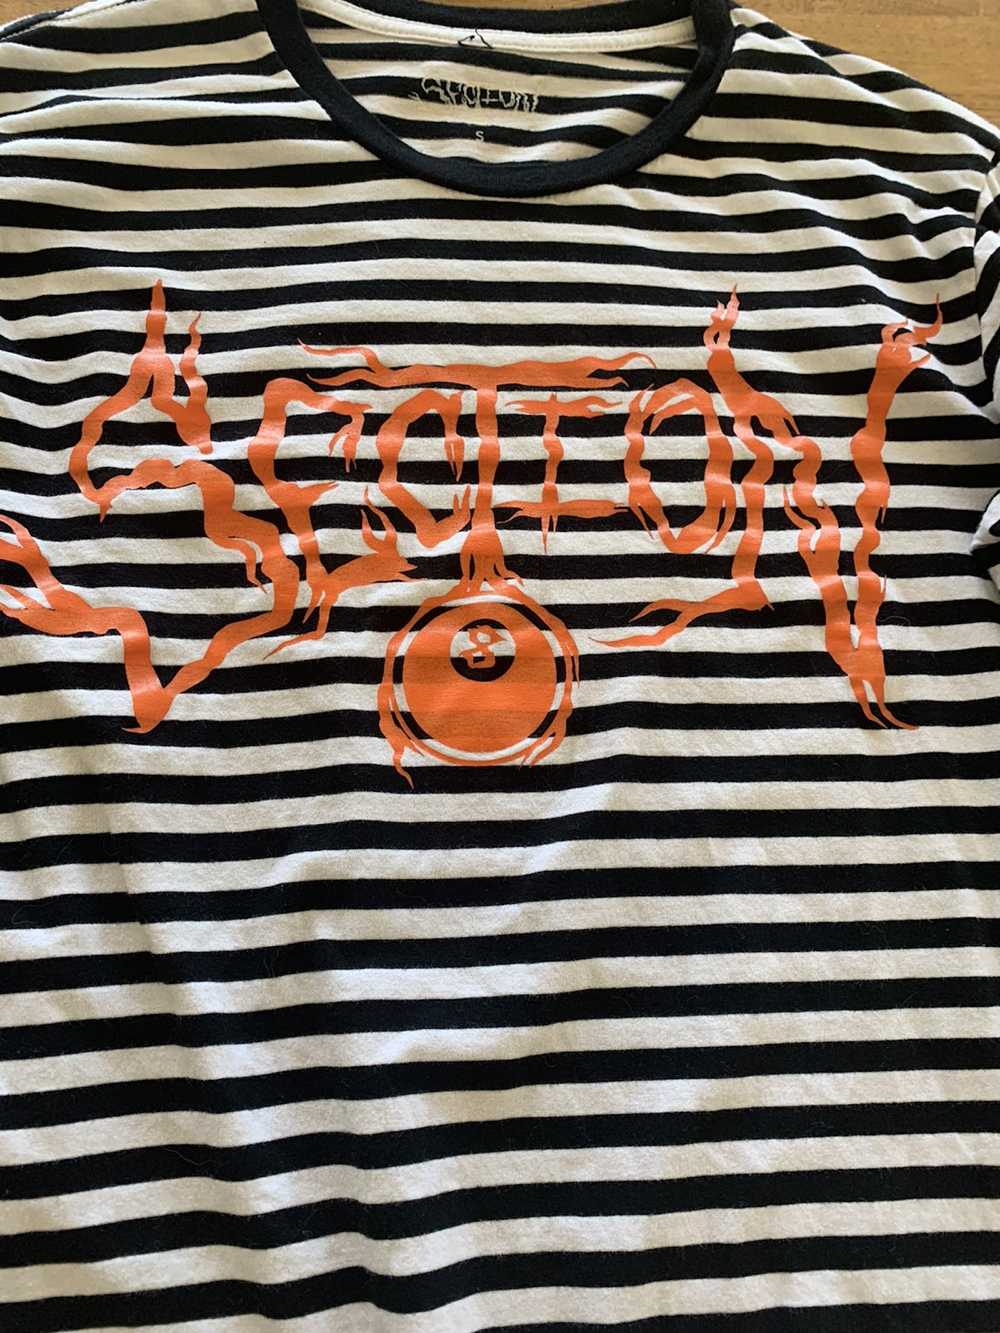 Section 8 Section 8 Striped long sleeve shirt - image 2